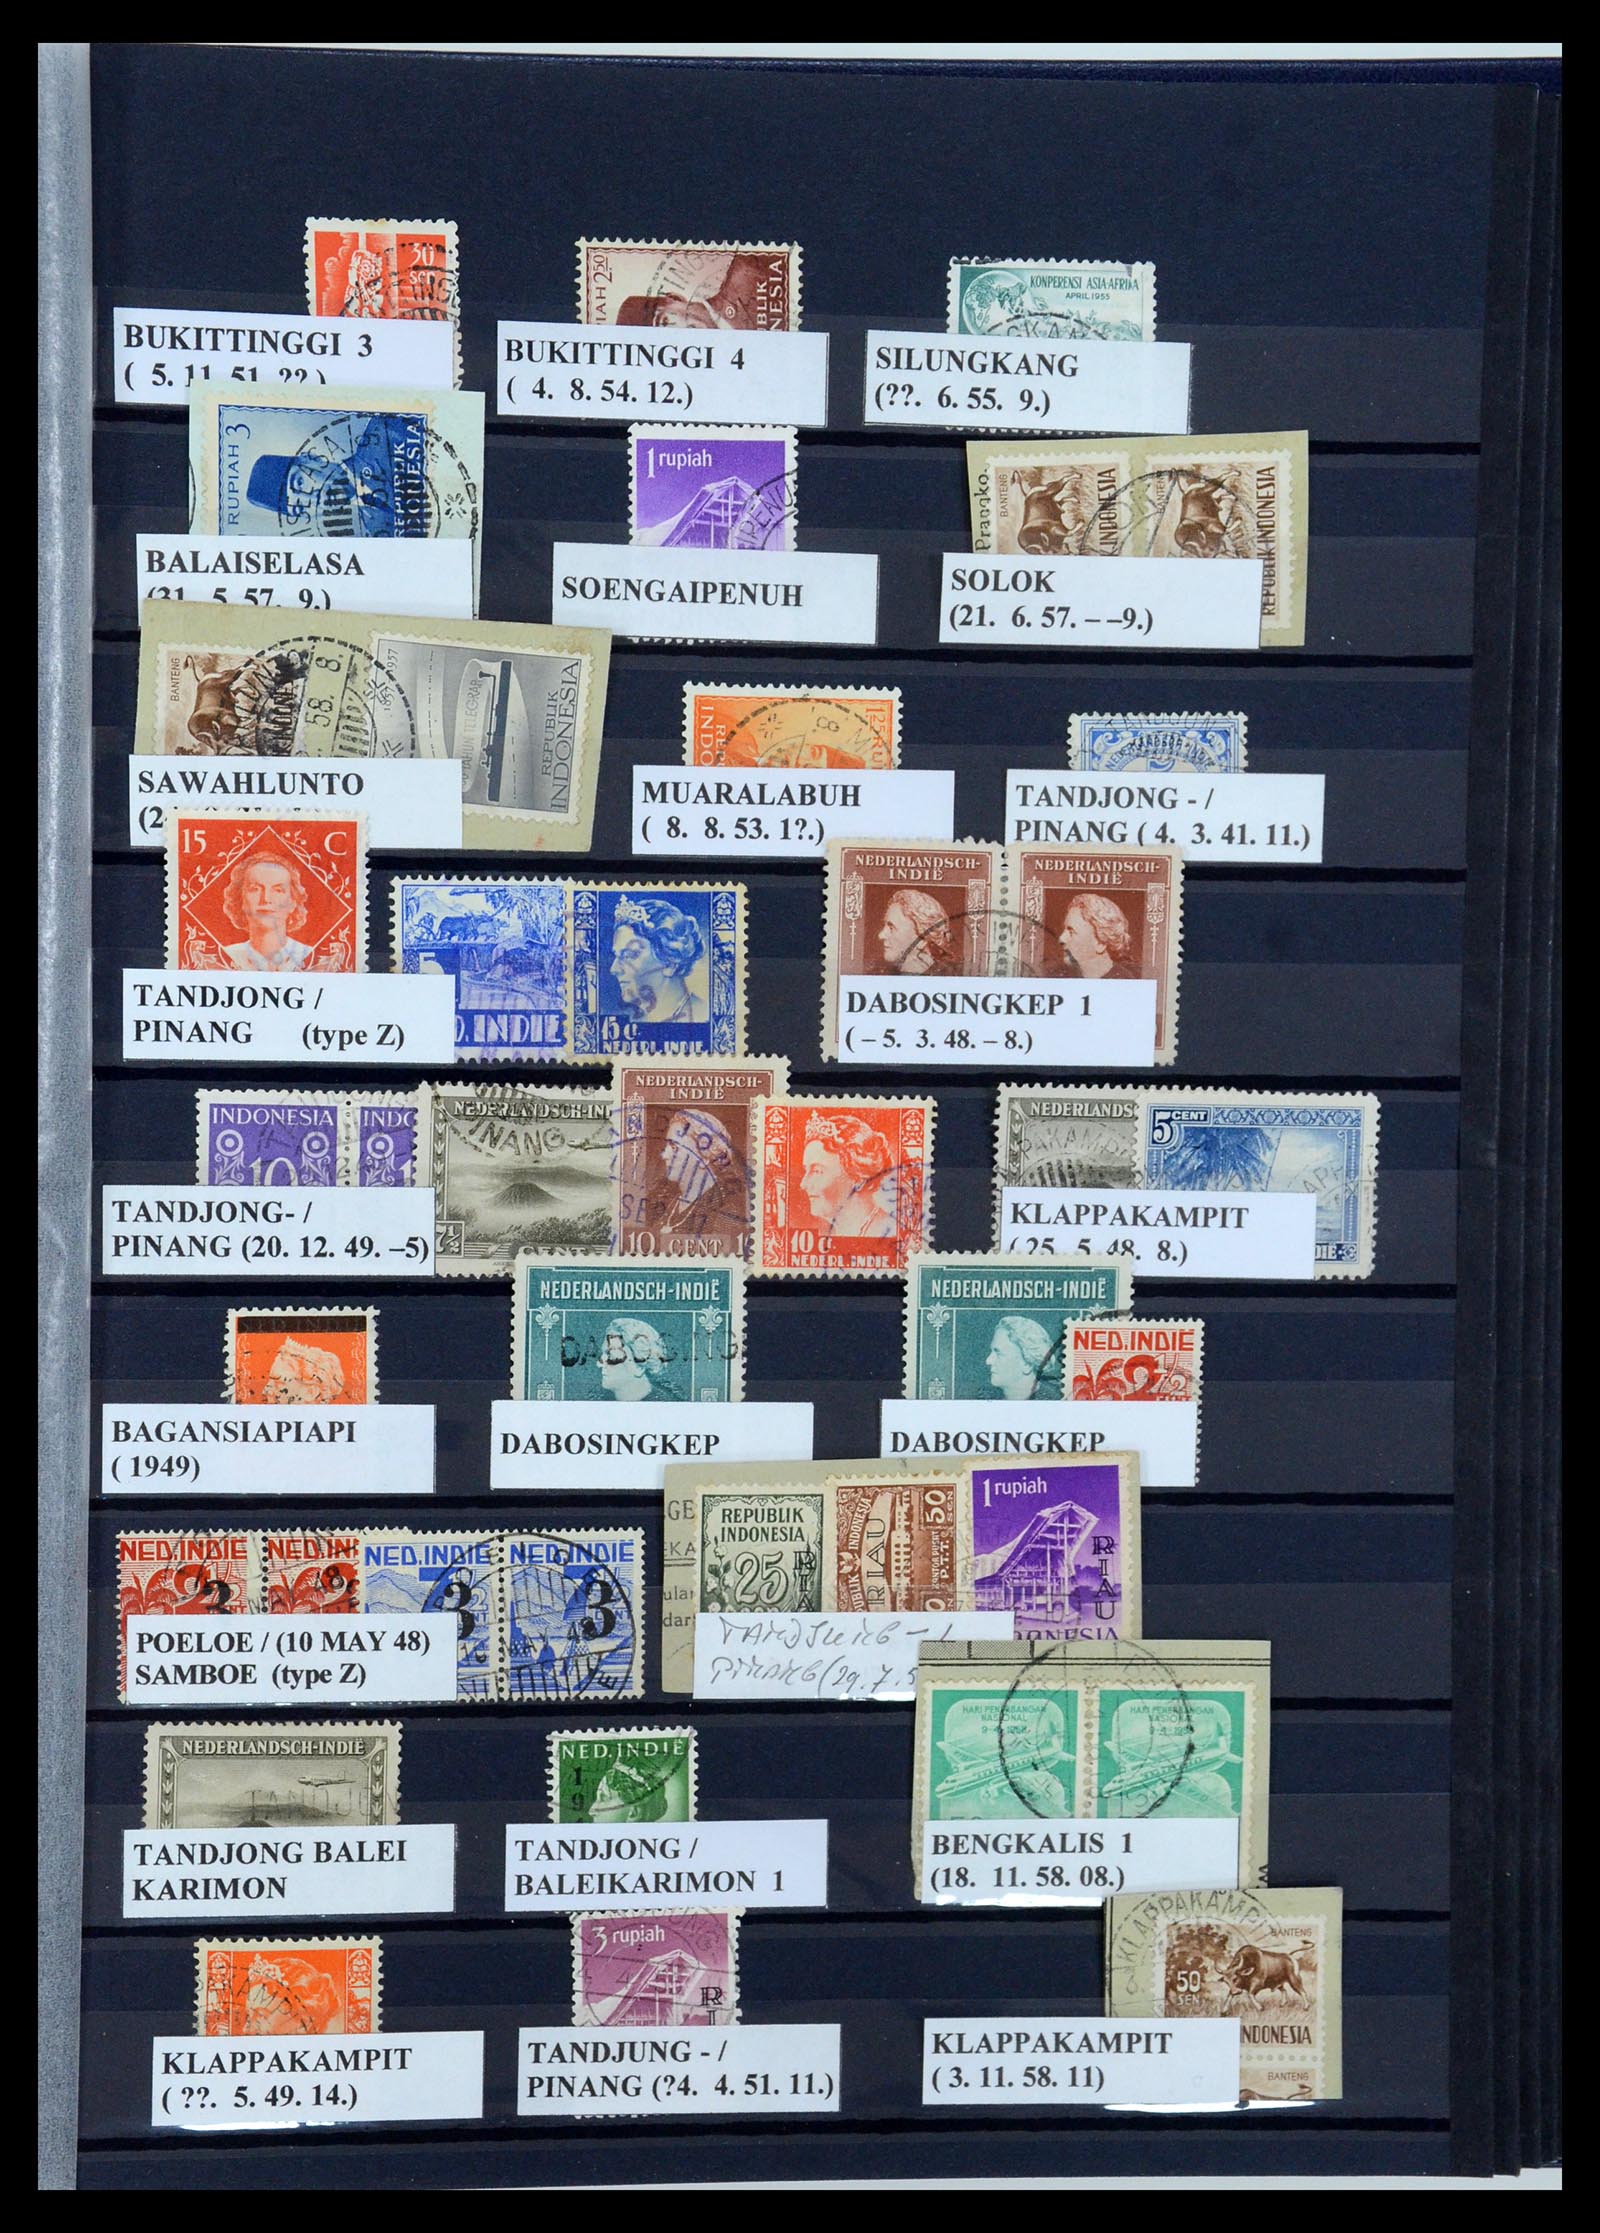 35612 043 - Stamp Collection 35612 Dutch east Indies cancels.